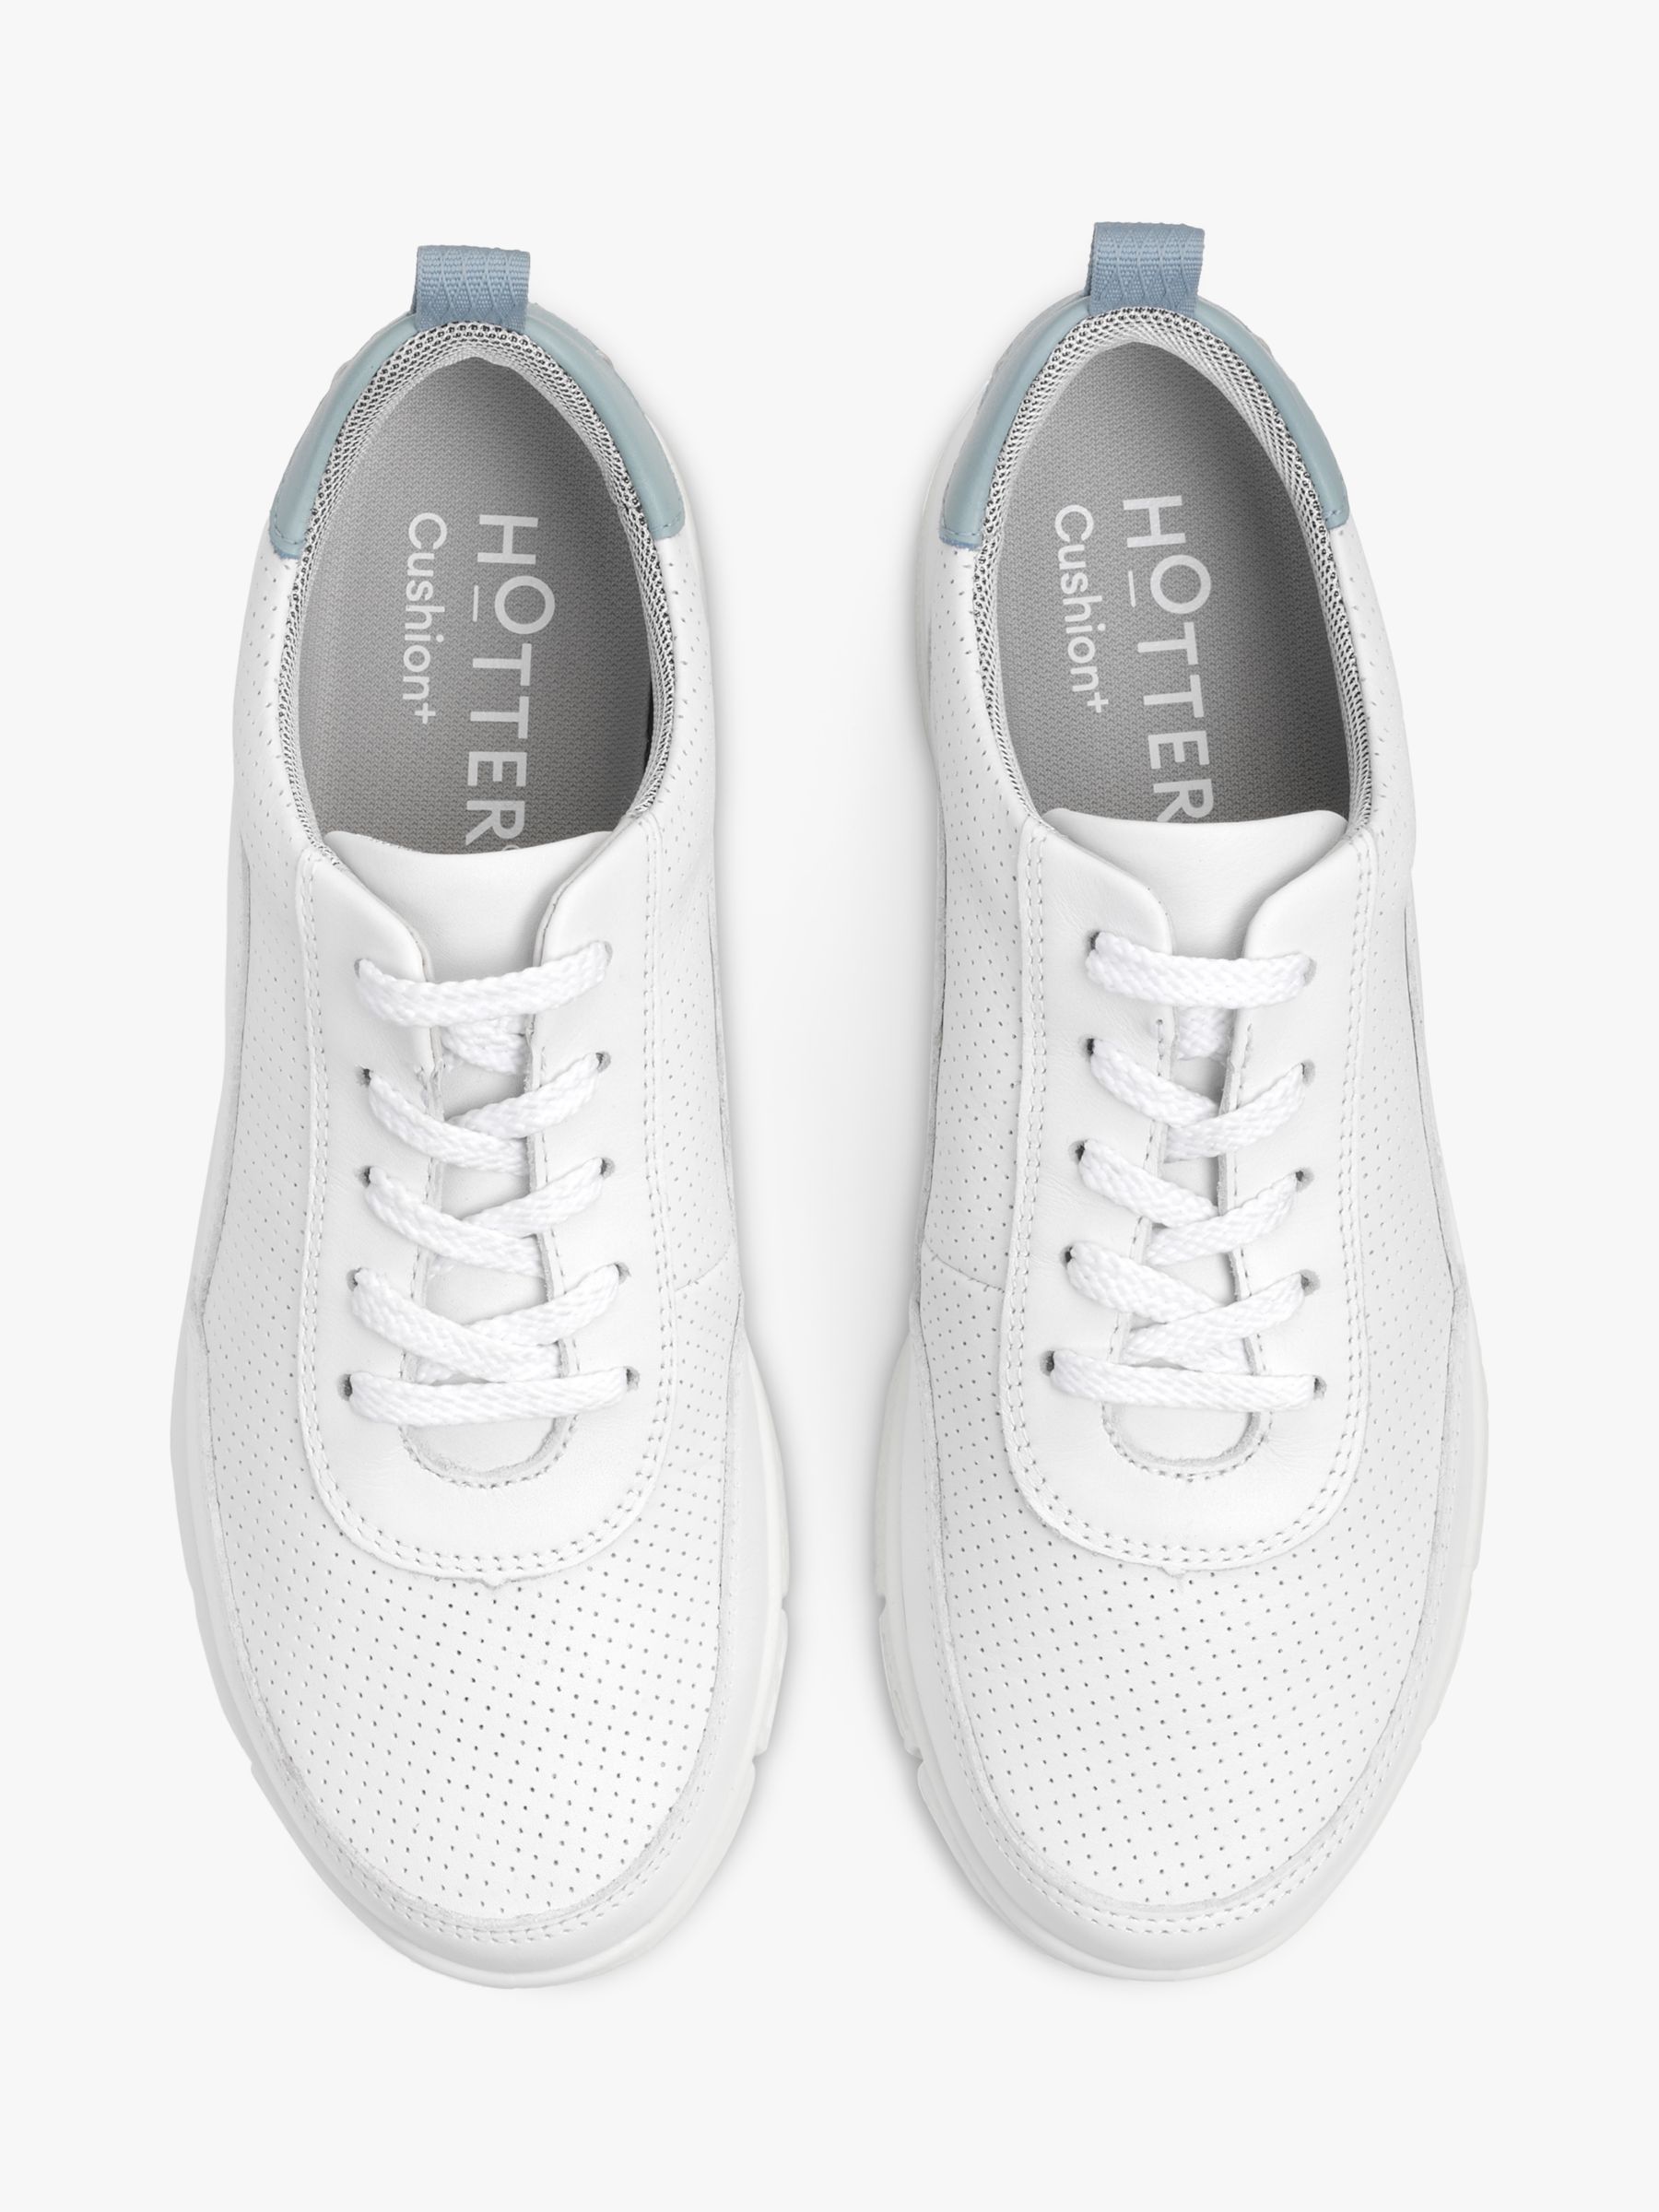 Buy Hotter Gravity II Wide Fit Lightweight Leather Trainers, White/Sage Online at johnlewis.com